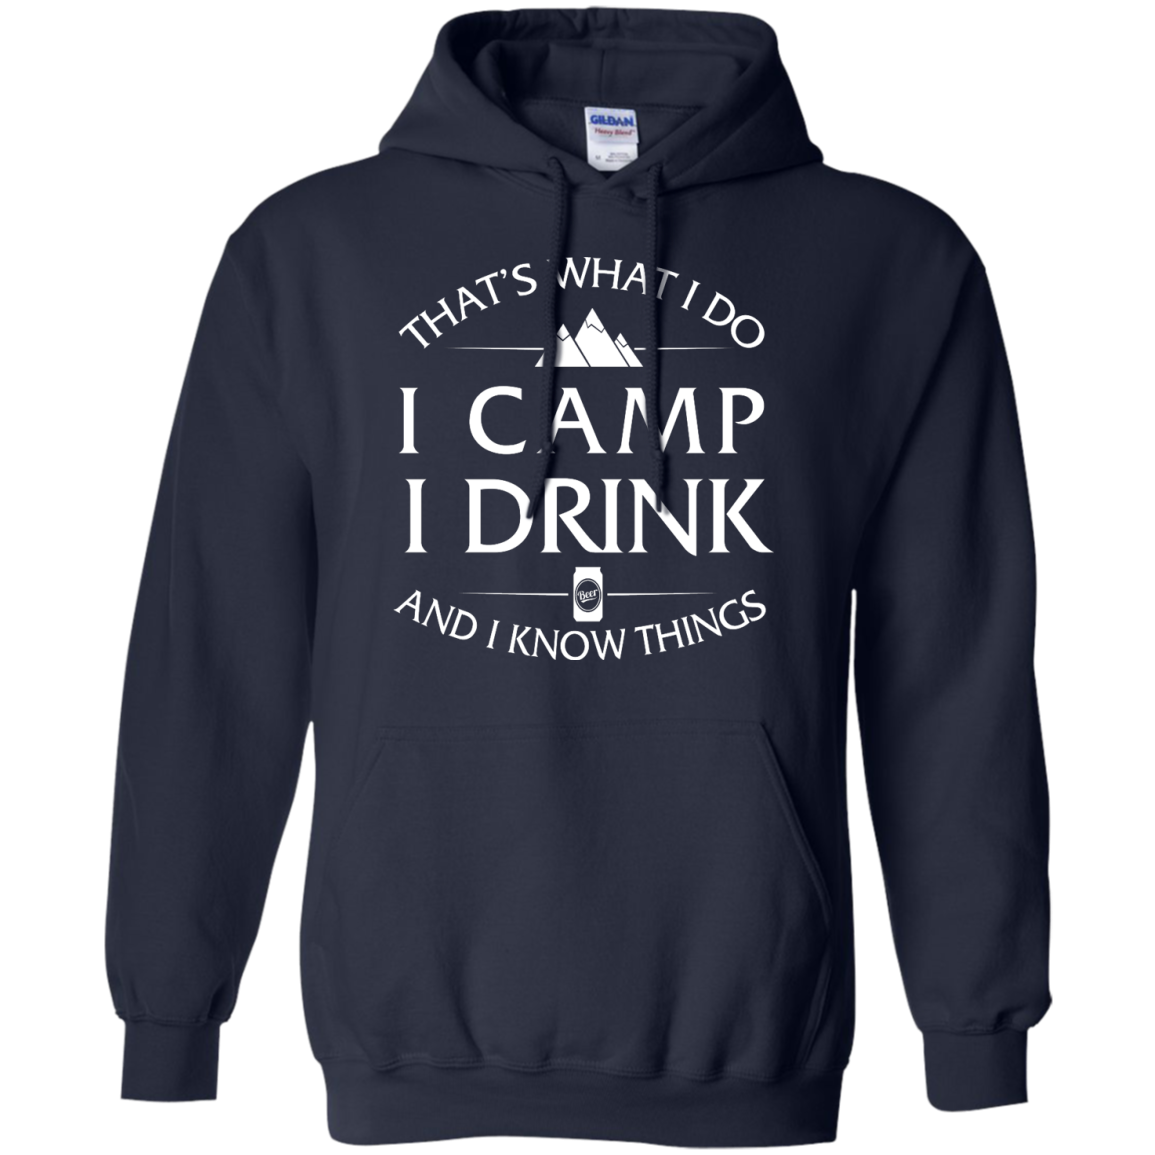 I Camp I Drink and I Know Things shirt